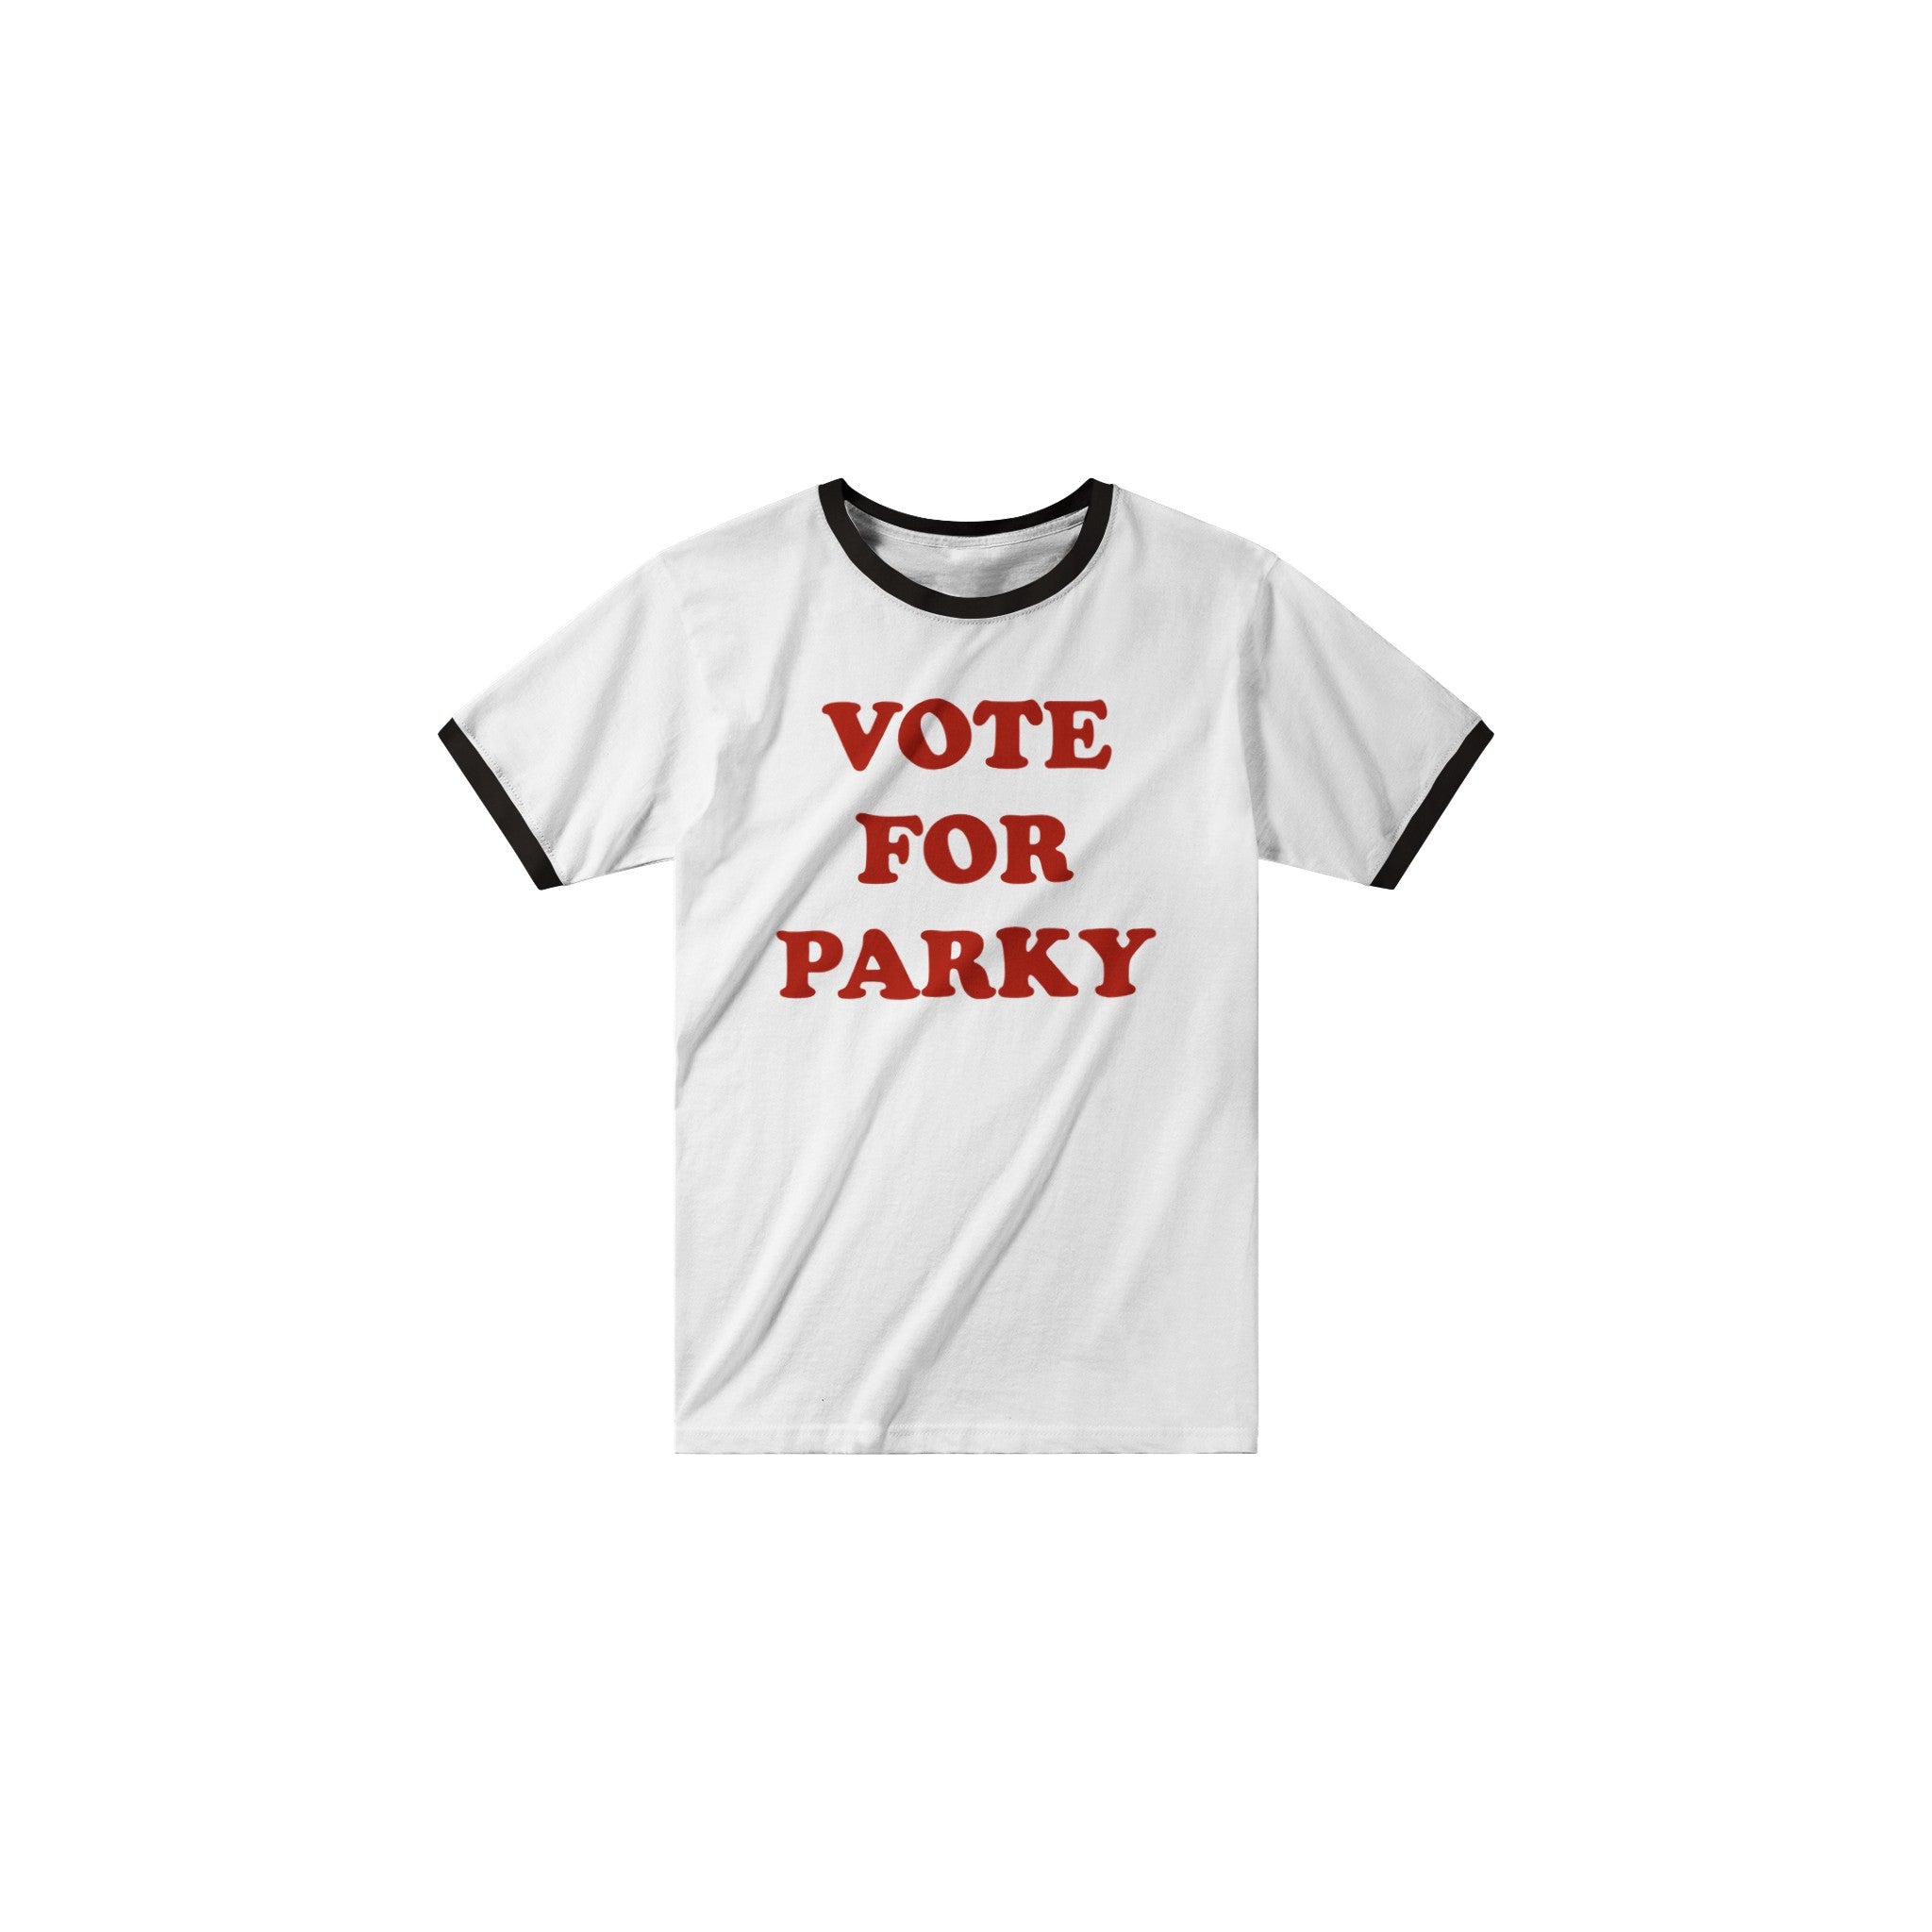 Classic 'Vote for Parky' Ringer T-shirt